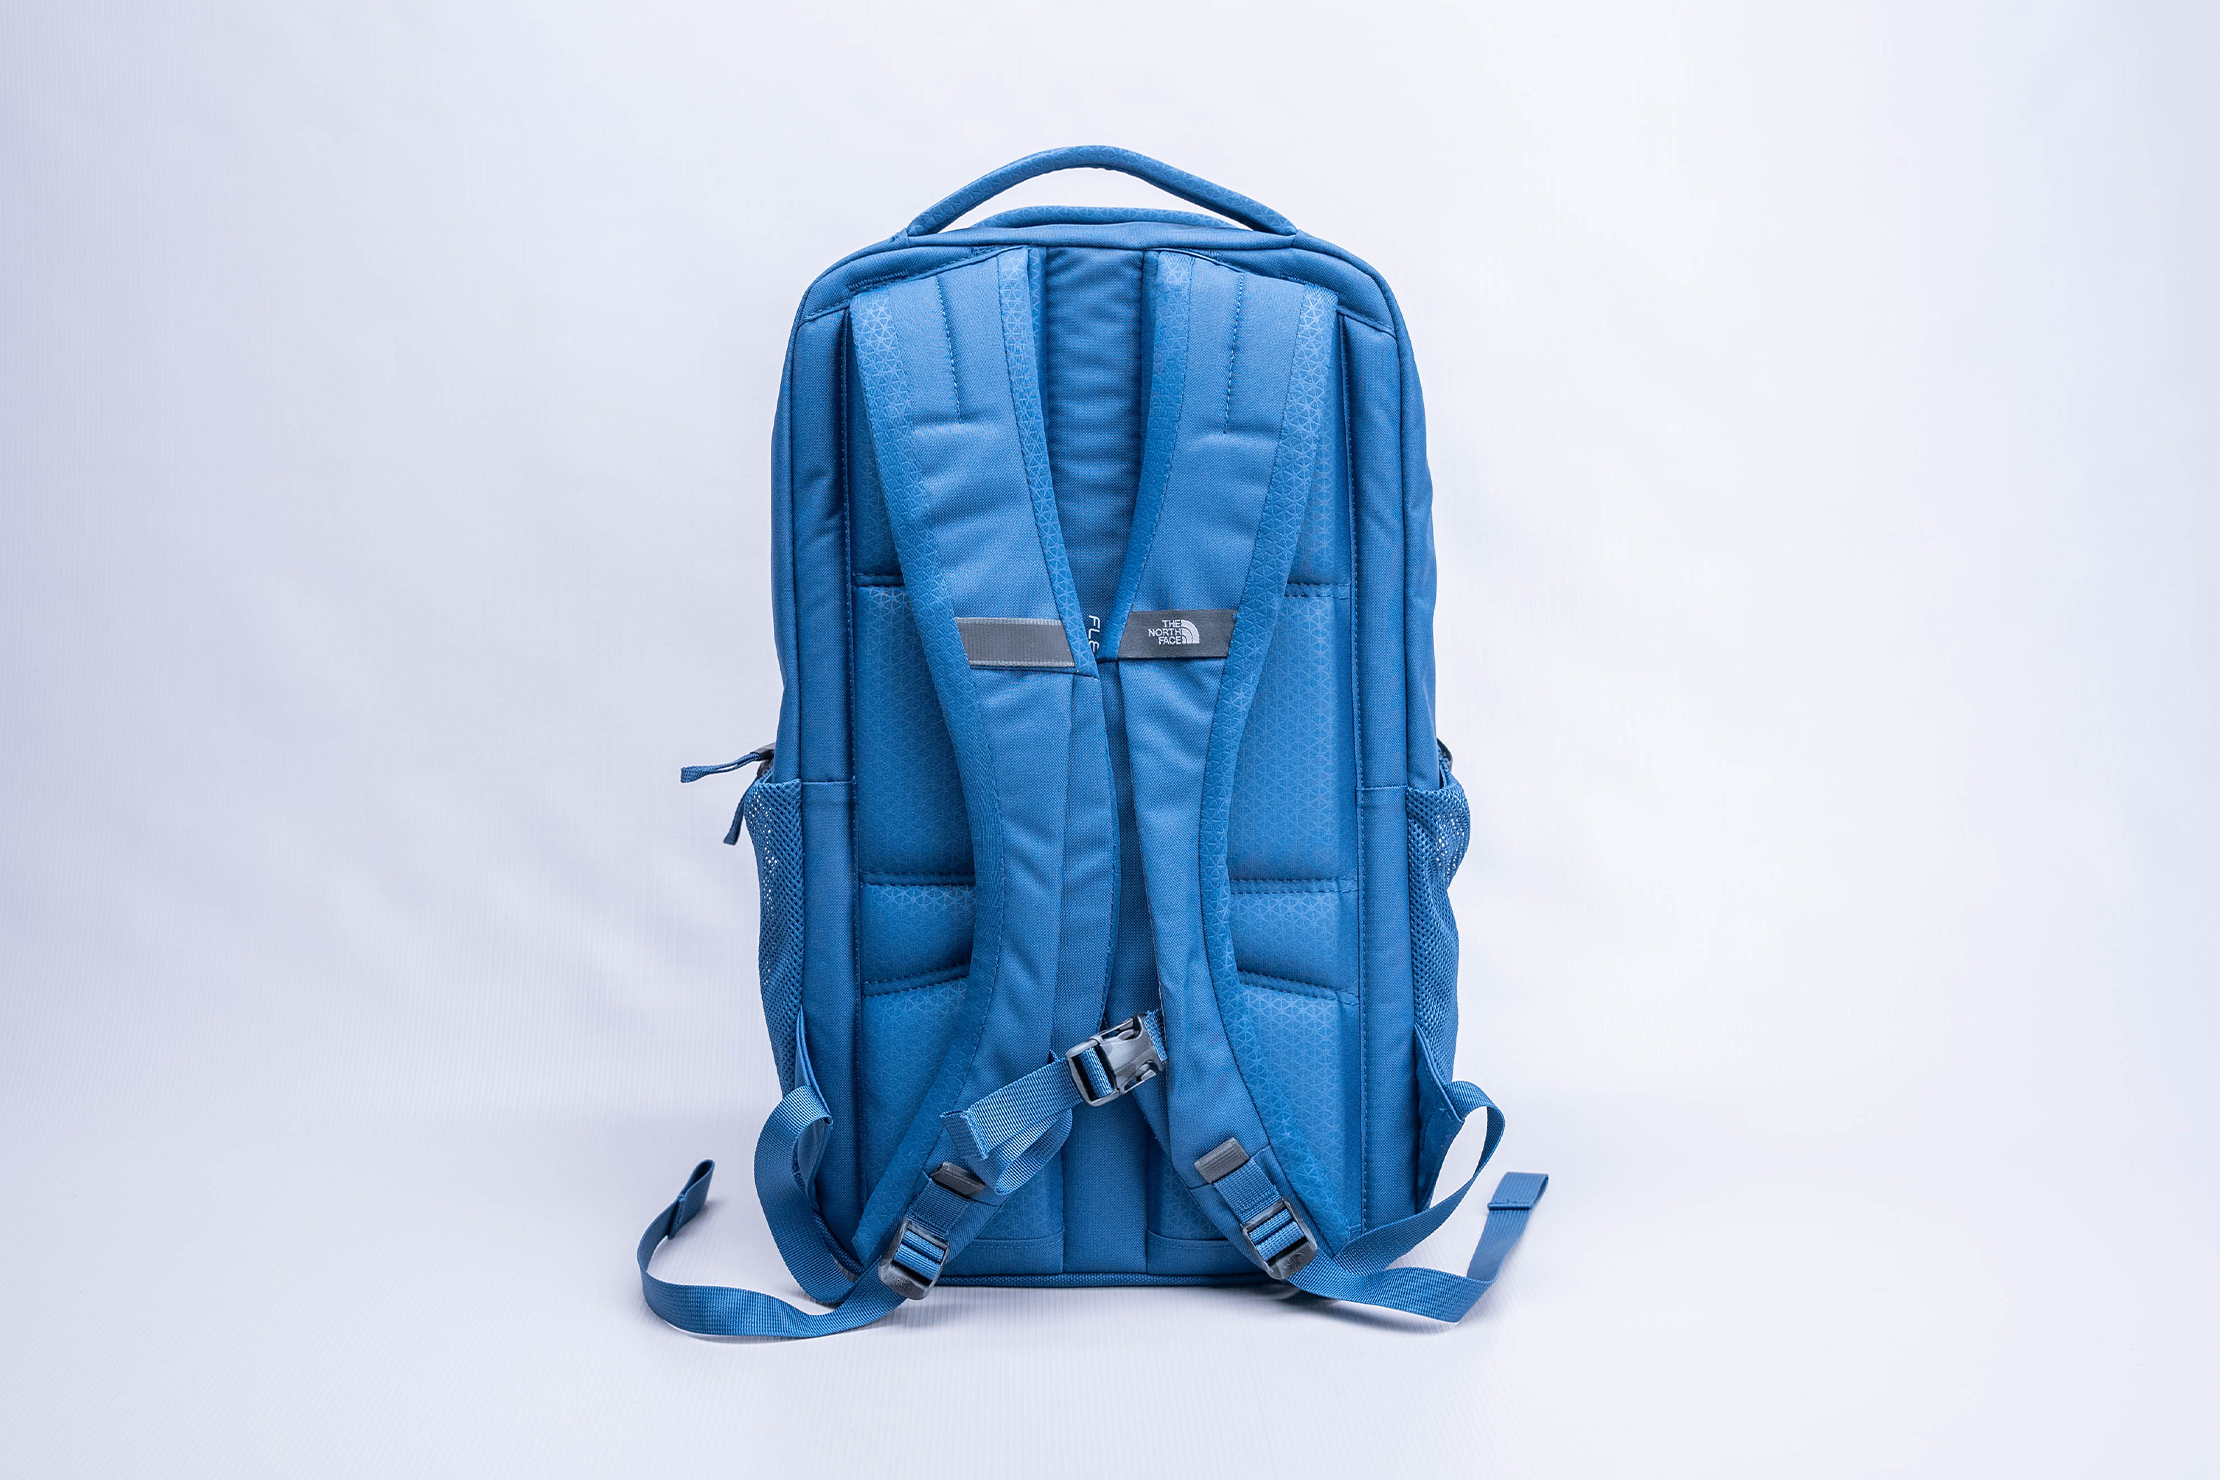 The North Face Vault Backpack Harness System